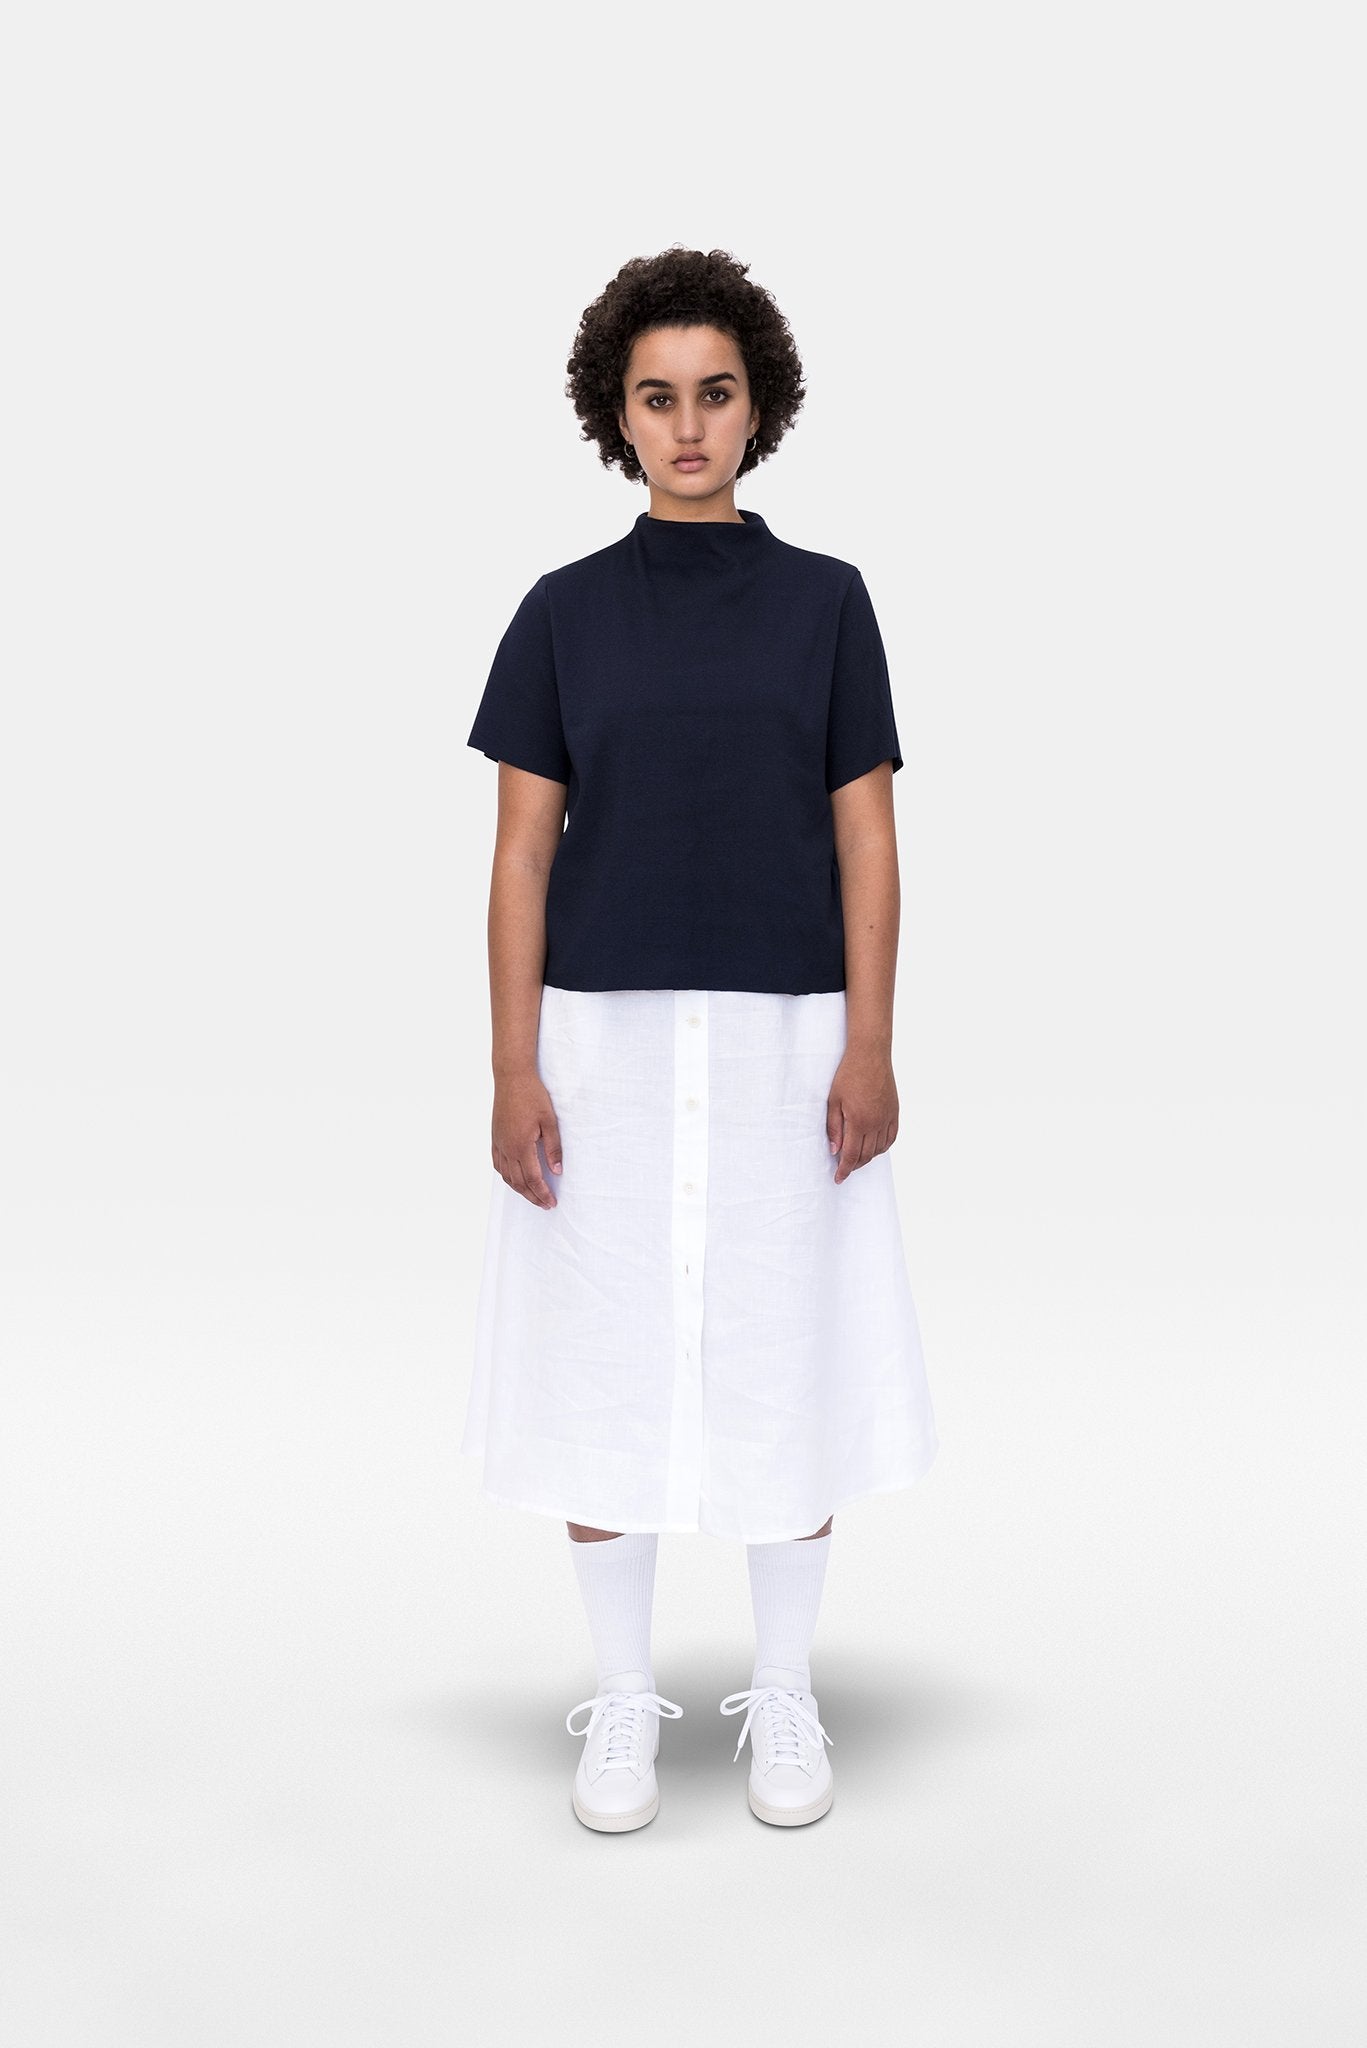 A.BCH A.14 Navy Short Sleeve Skivvy in Organic Cotton